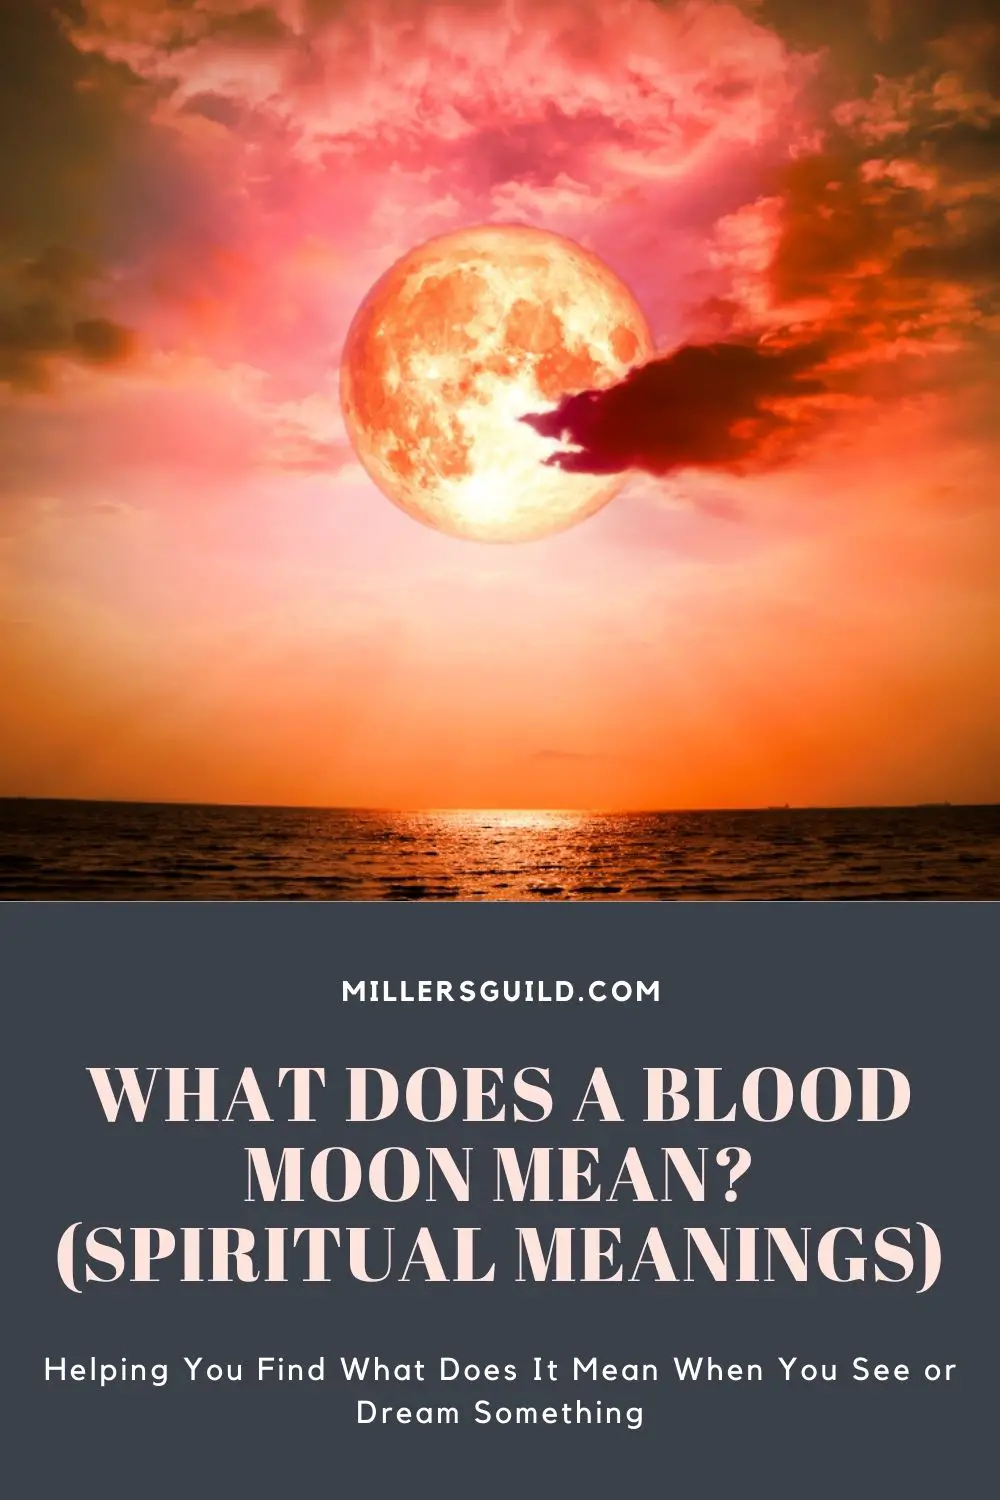 1 General Meaning Of A Blood Moon